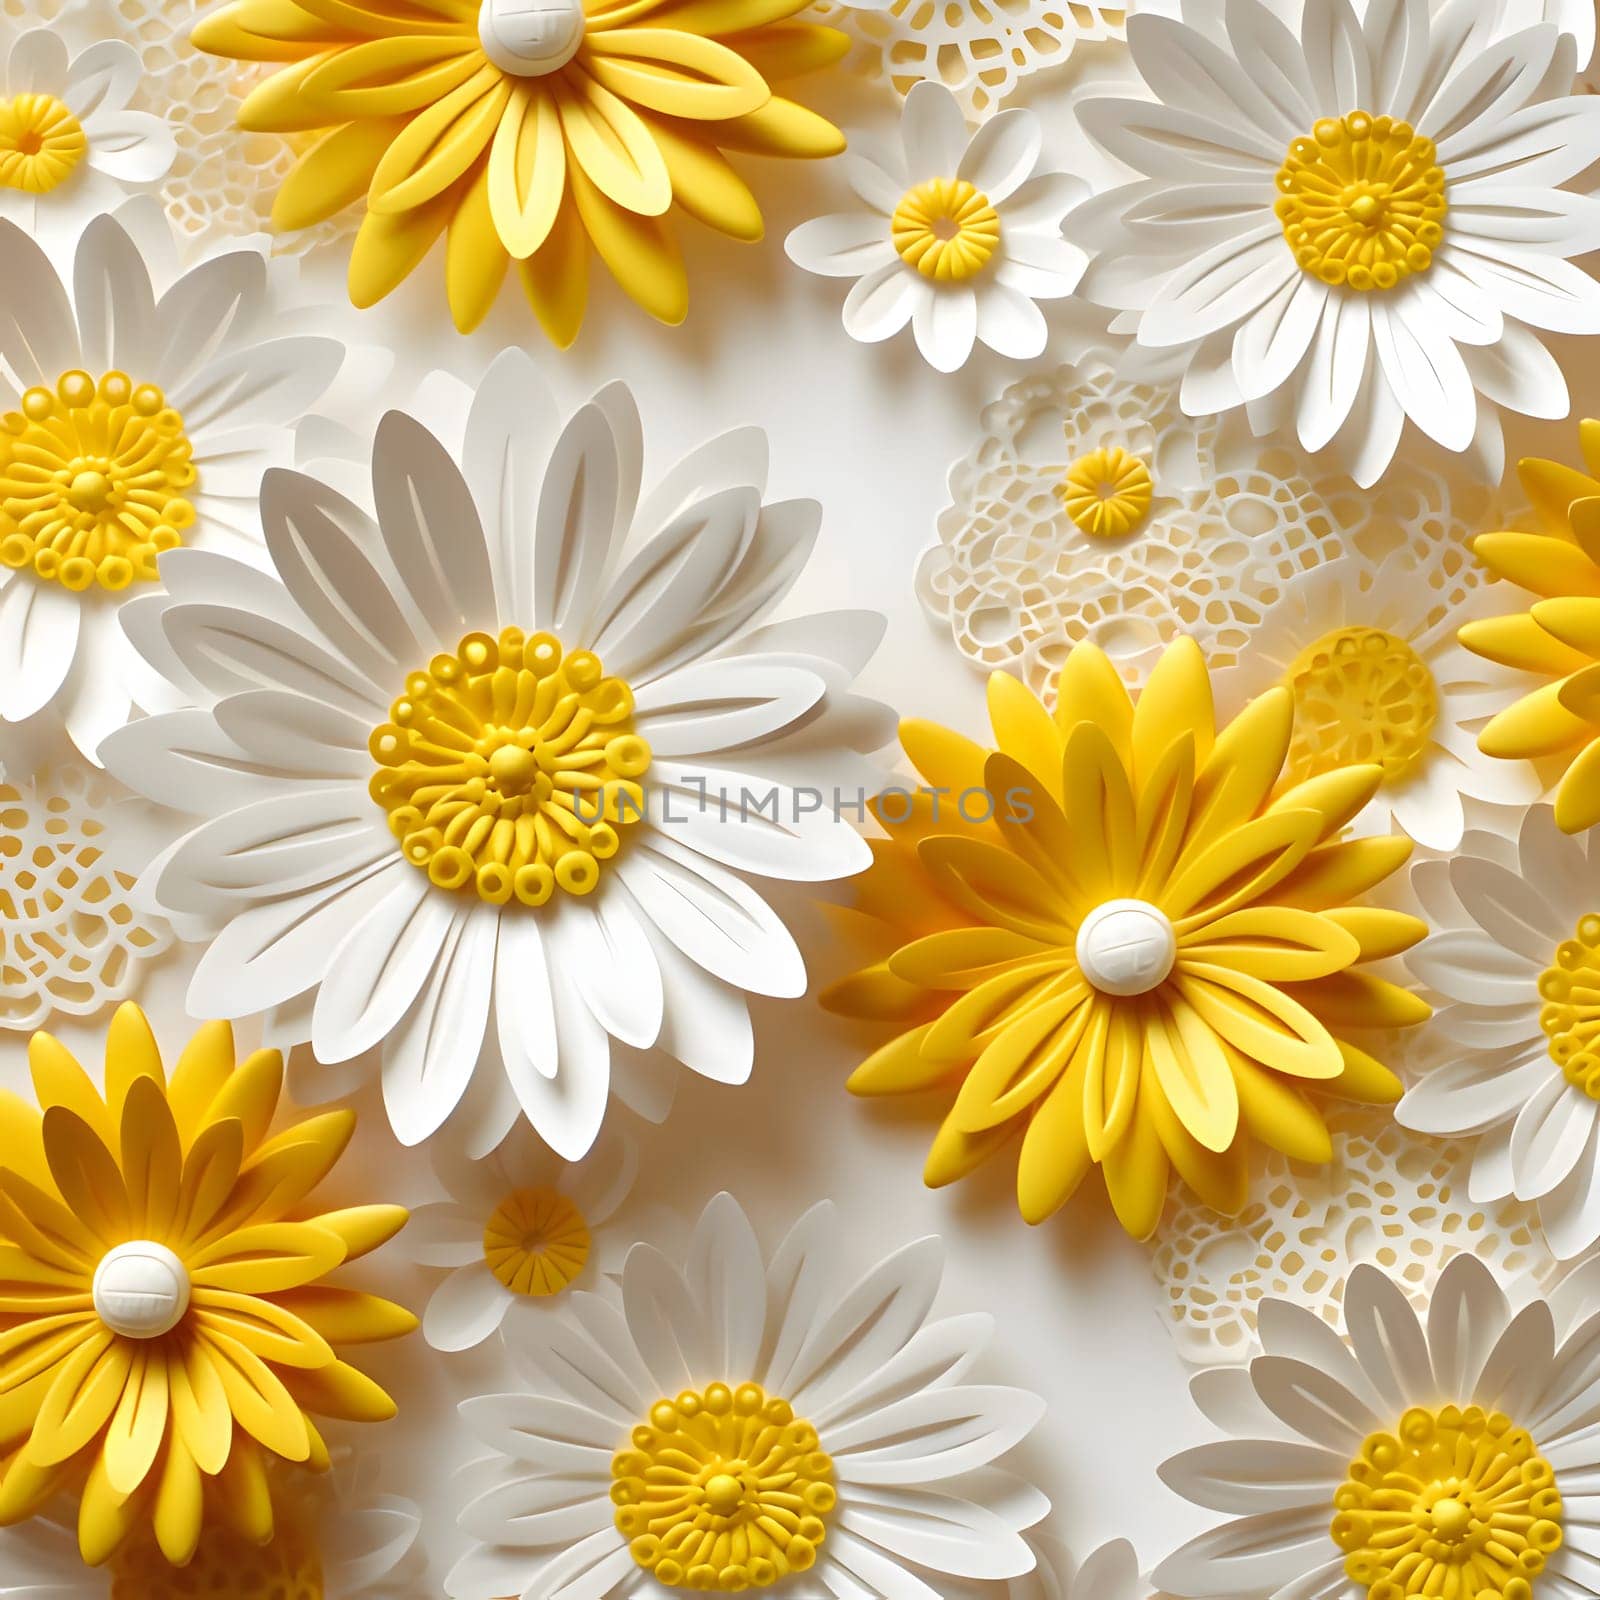 Patterns and banners backgrounds: Seamless pattern of white and yellow daisies on a white background